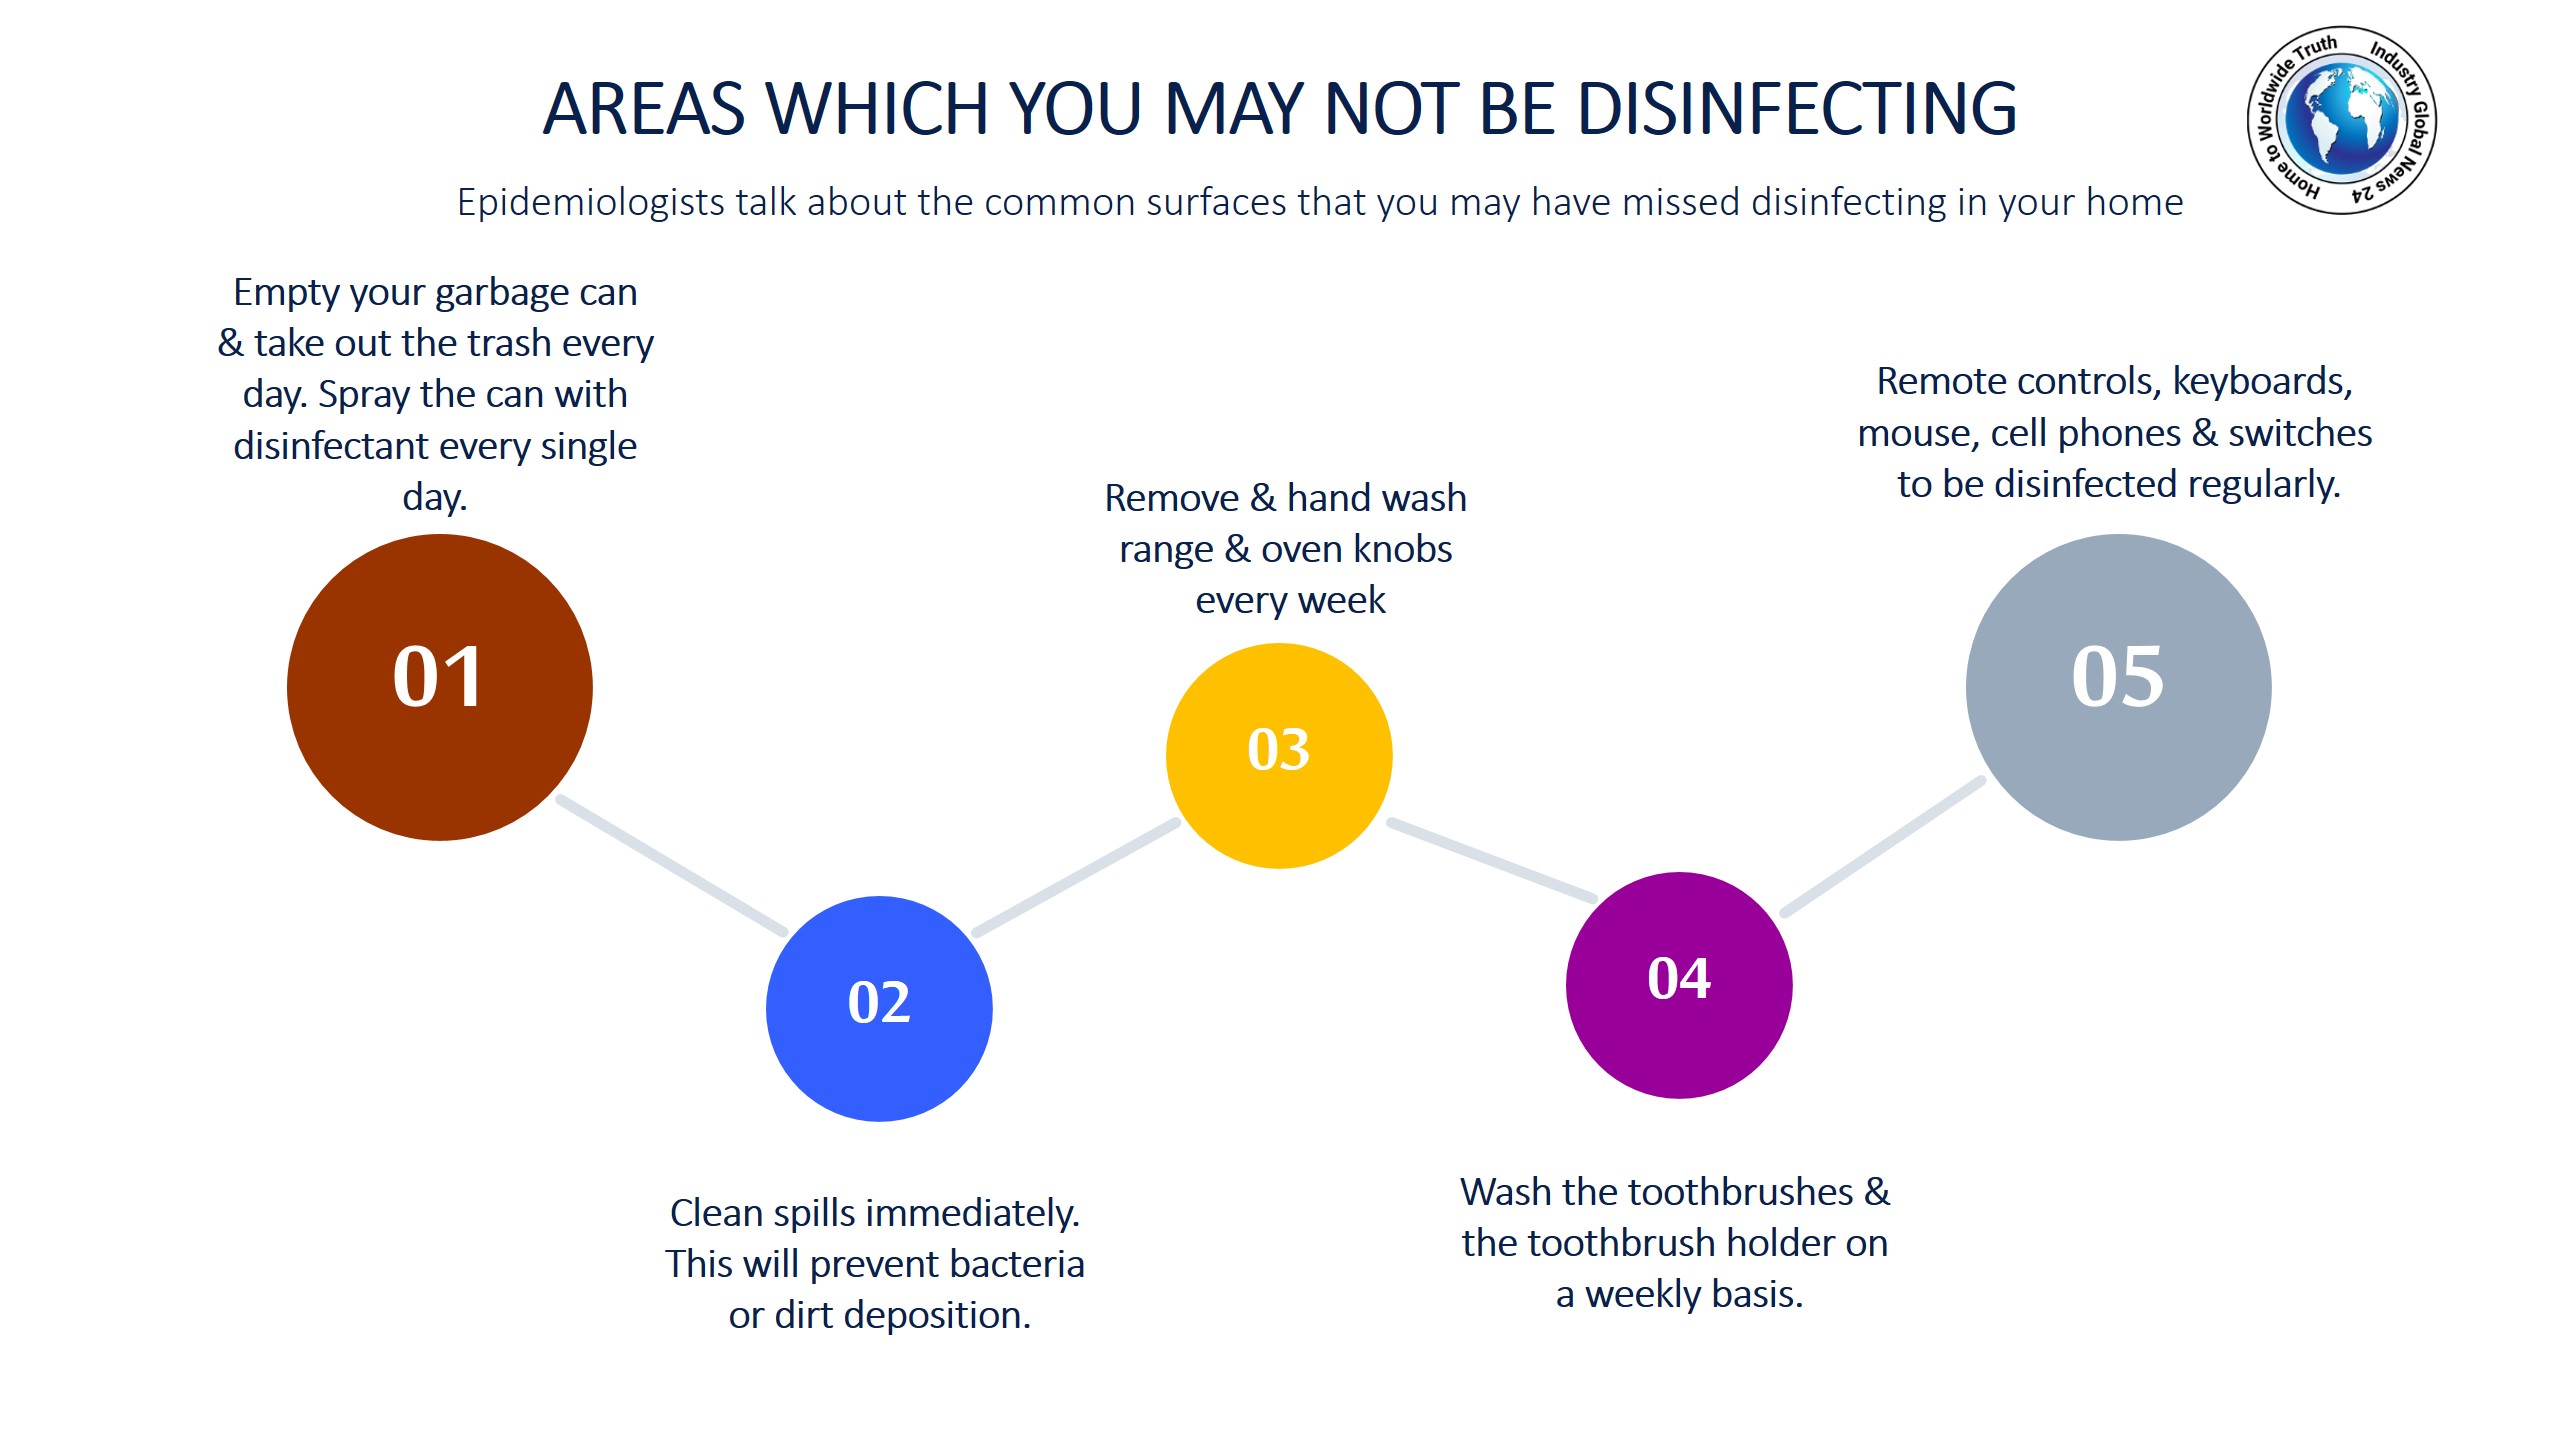 Areas which you may not be disinfecting